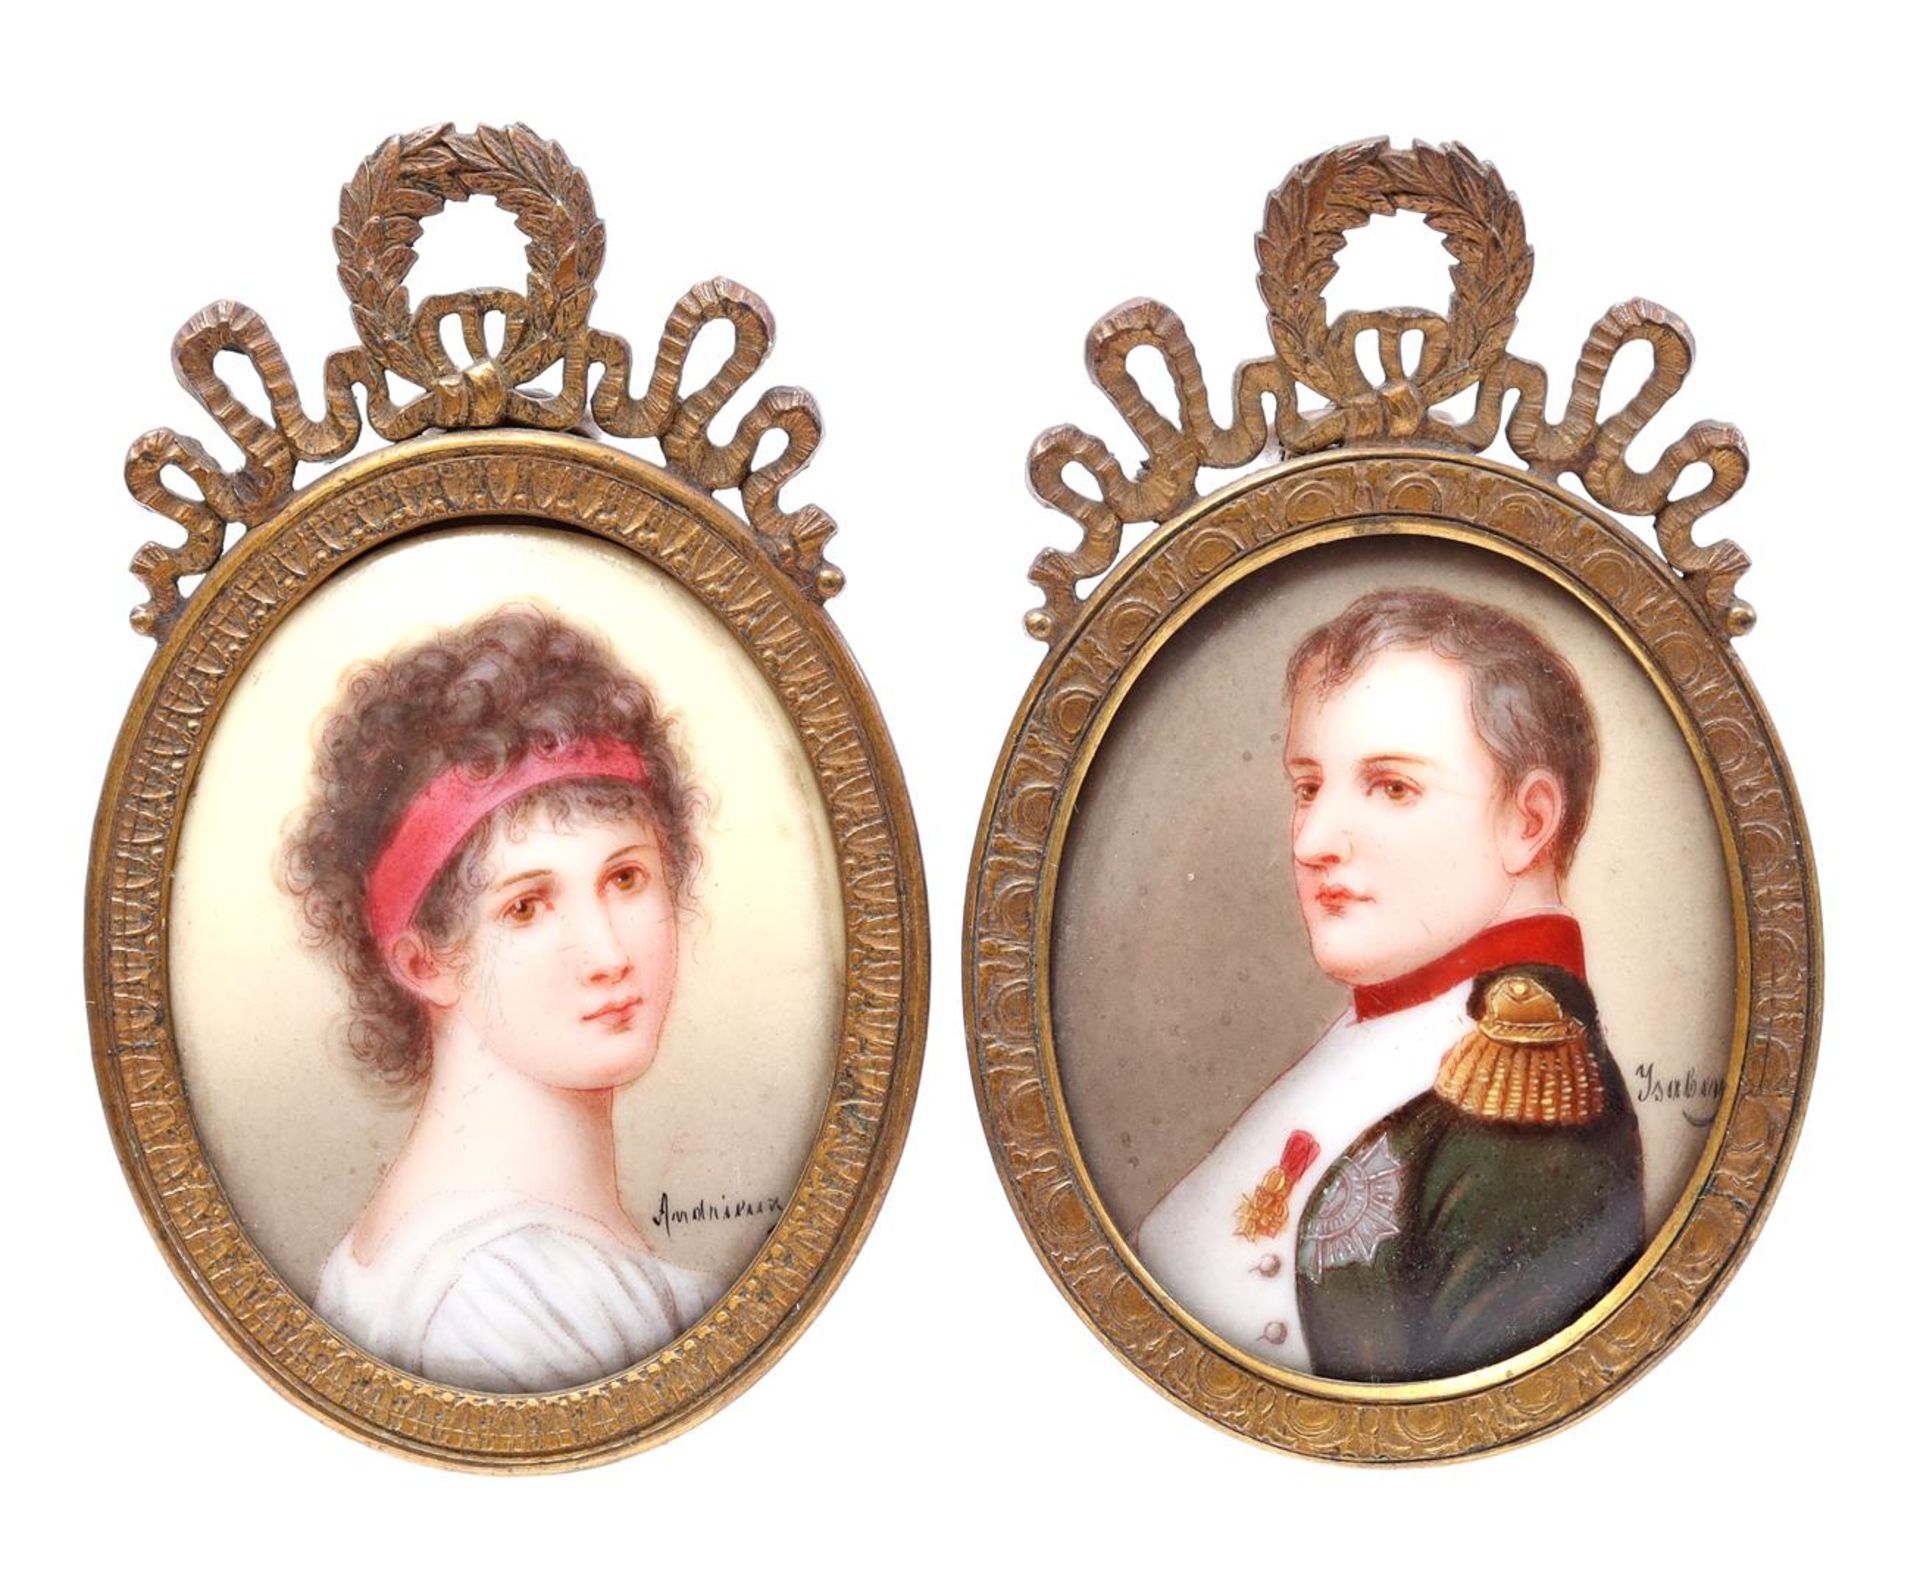 Oval portrait of Napoleon and Madame Récamier